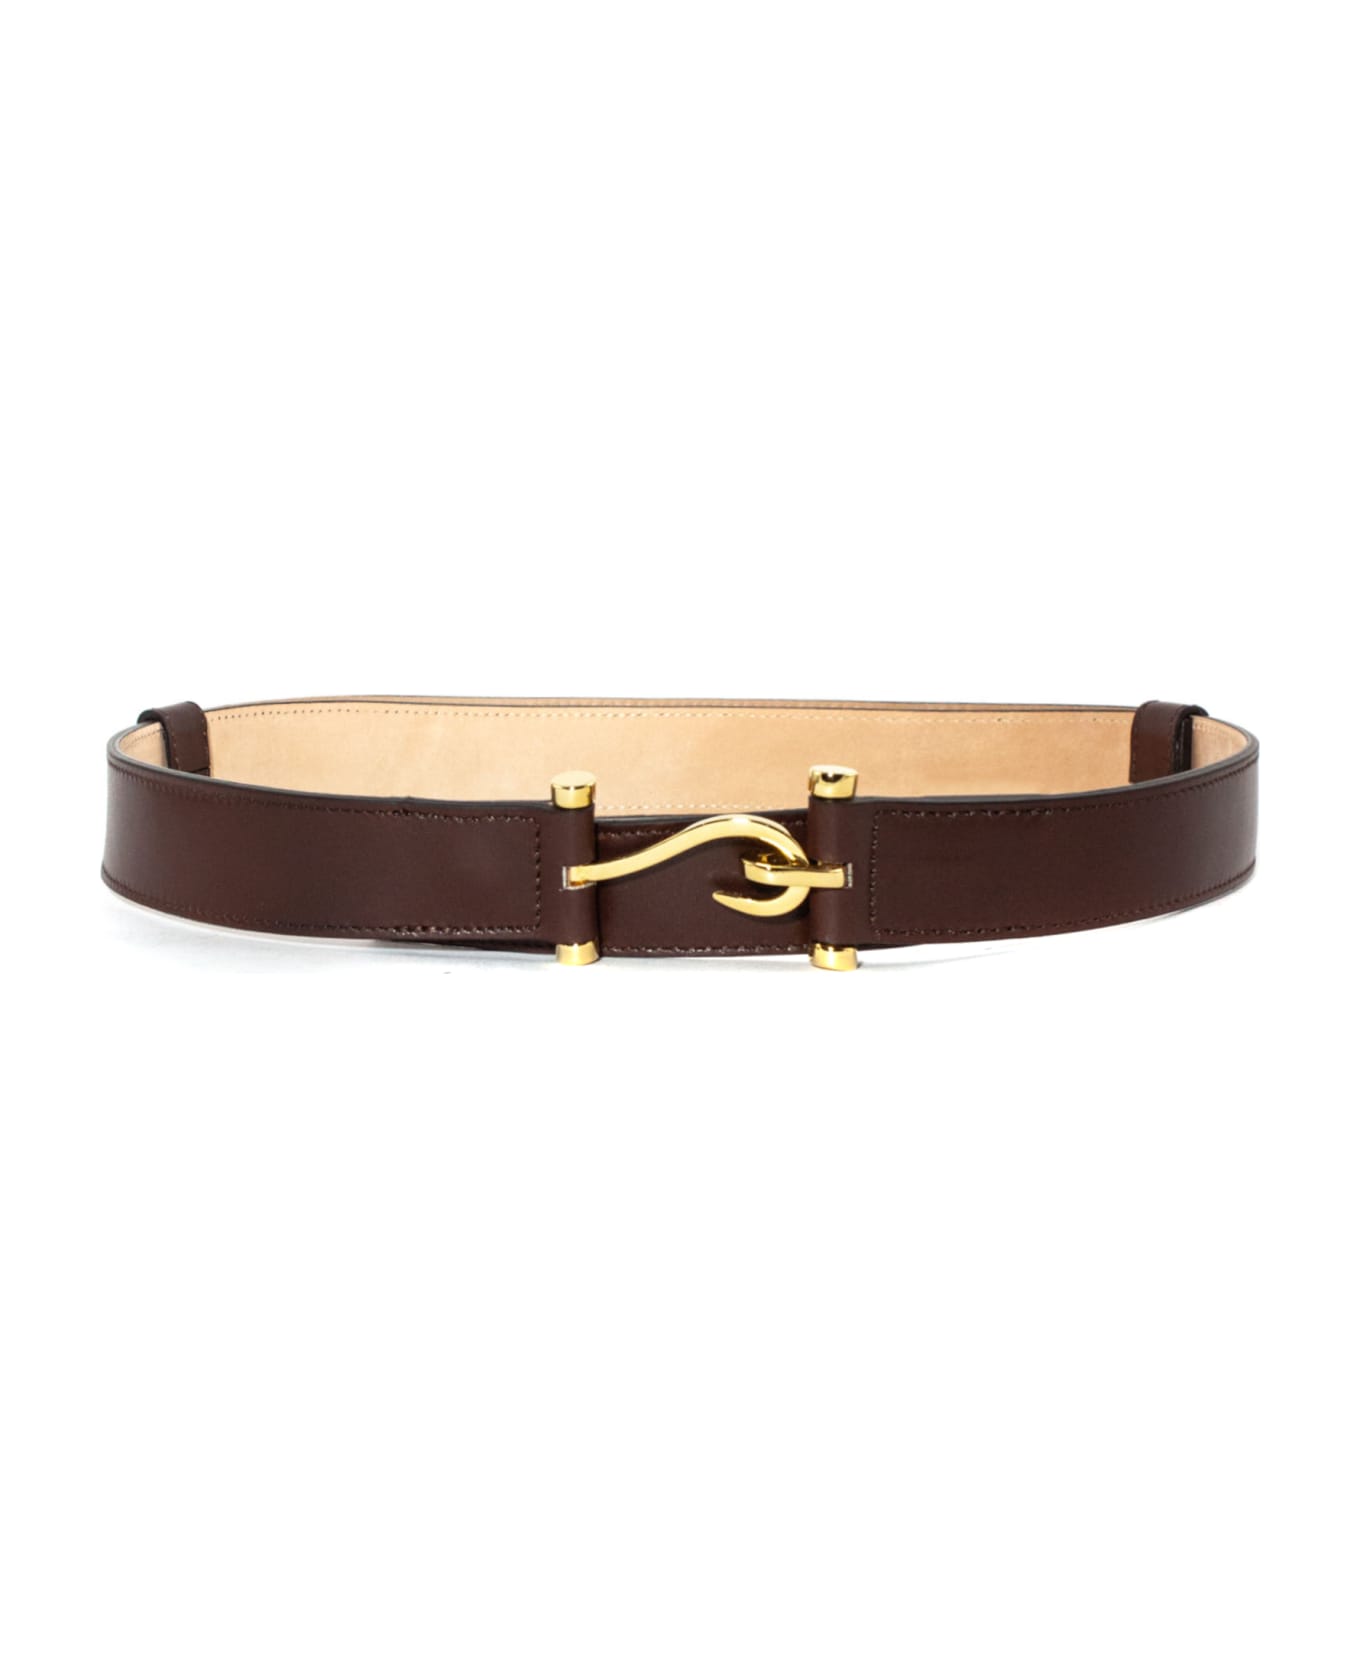 Edhen Milano Brown Leather Comporta Belt - Tabacco